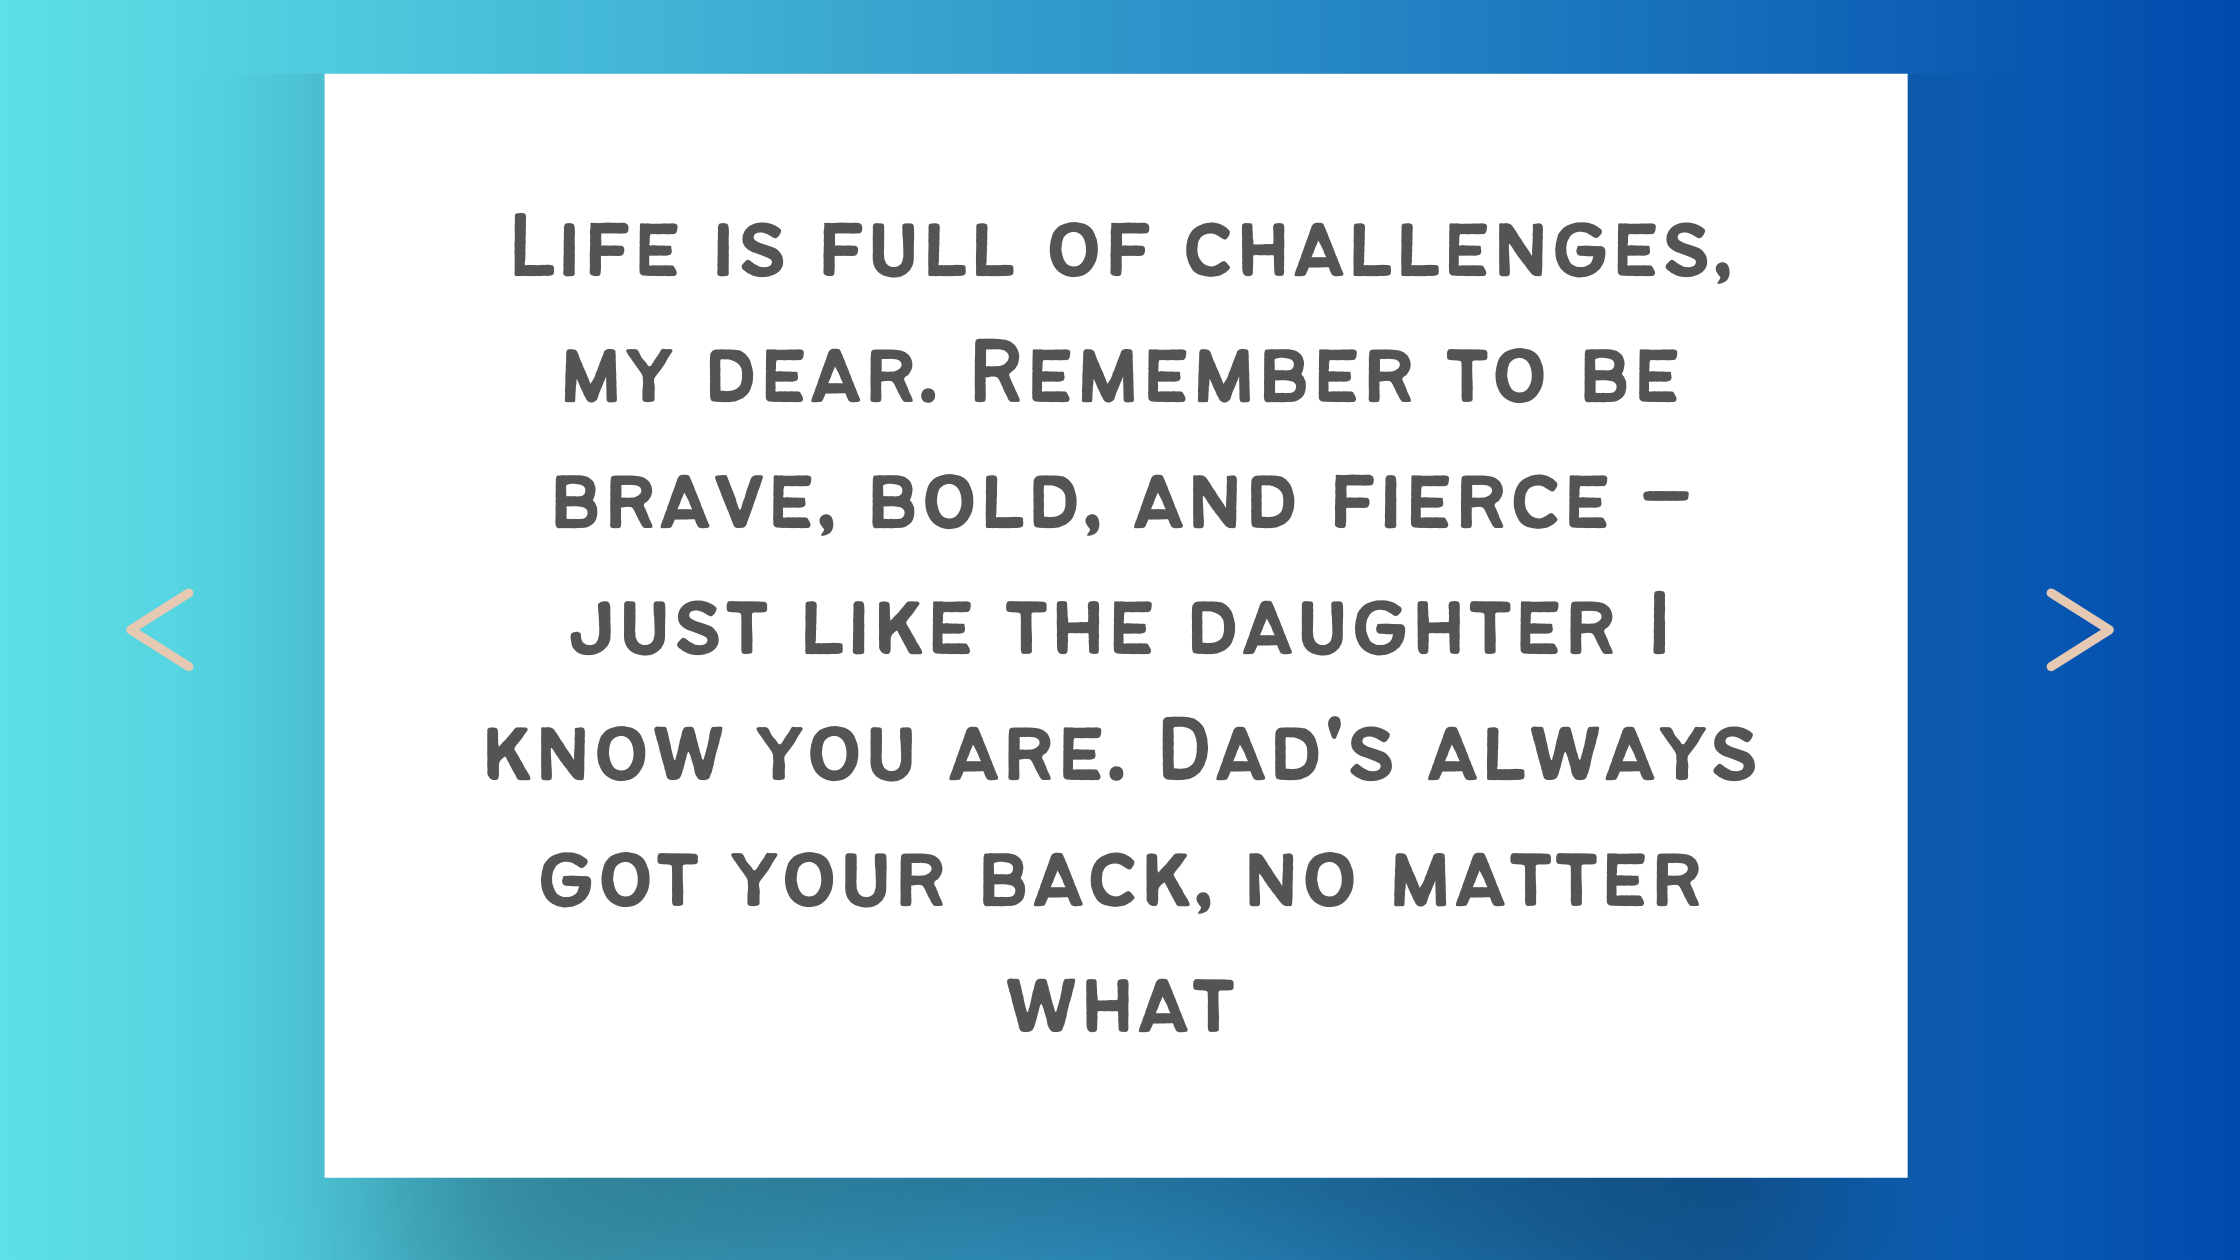 10 Heartwarming Sweet Messages from Dad to Daughter to Brighten Up Her Day 🌞